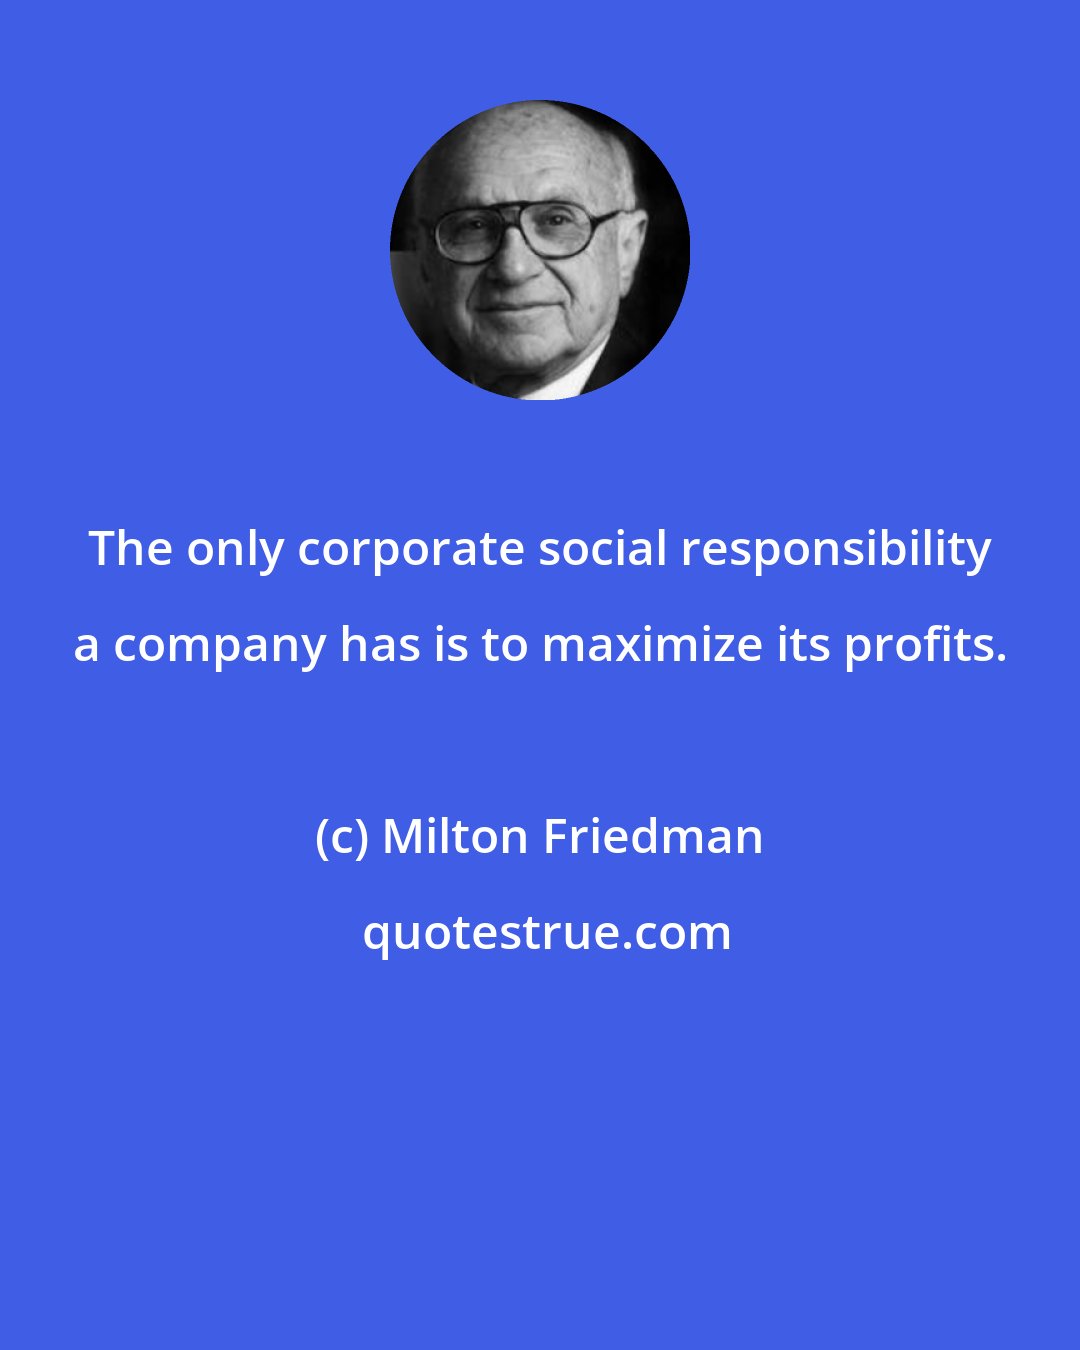 Milton Friedman: The only corporate social responsibility a company has is to maximize its profits.